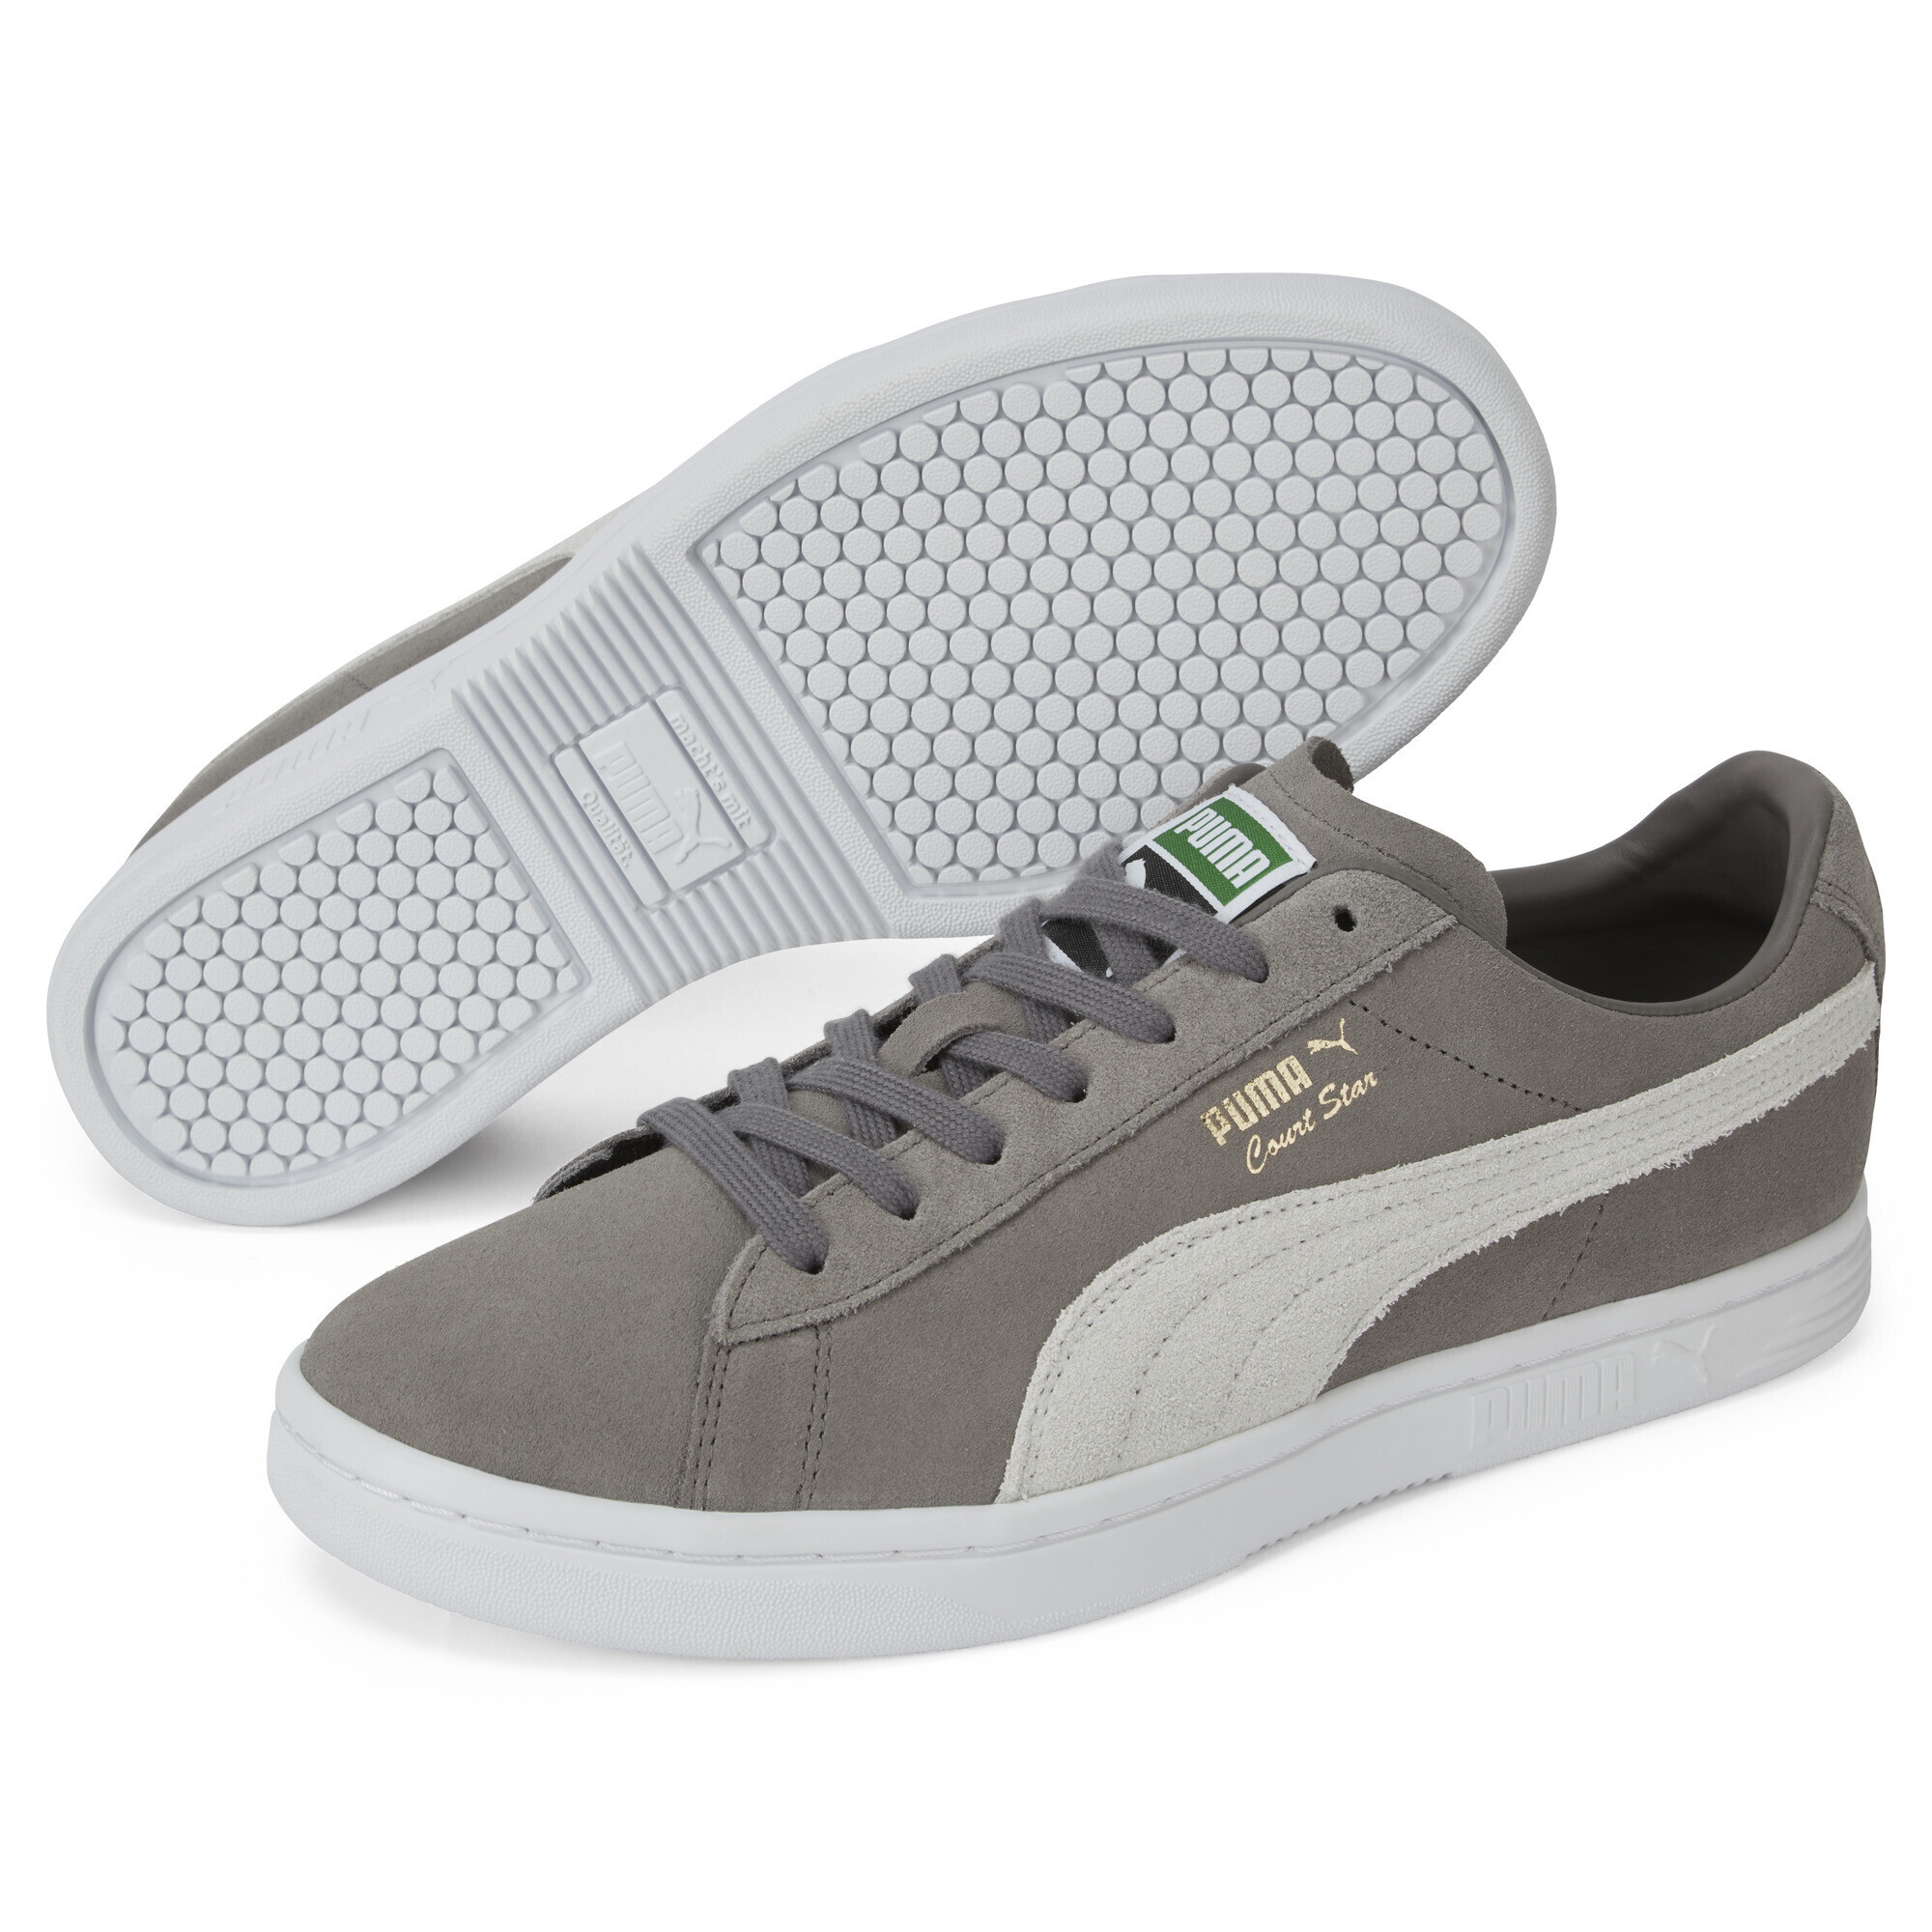 PUMA Court Star Suede Low Trainers Sports Shoes | eBay